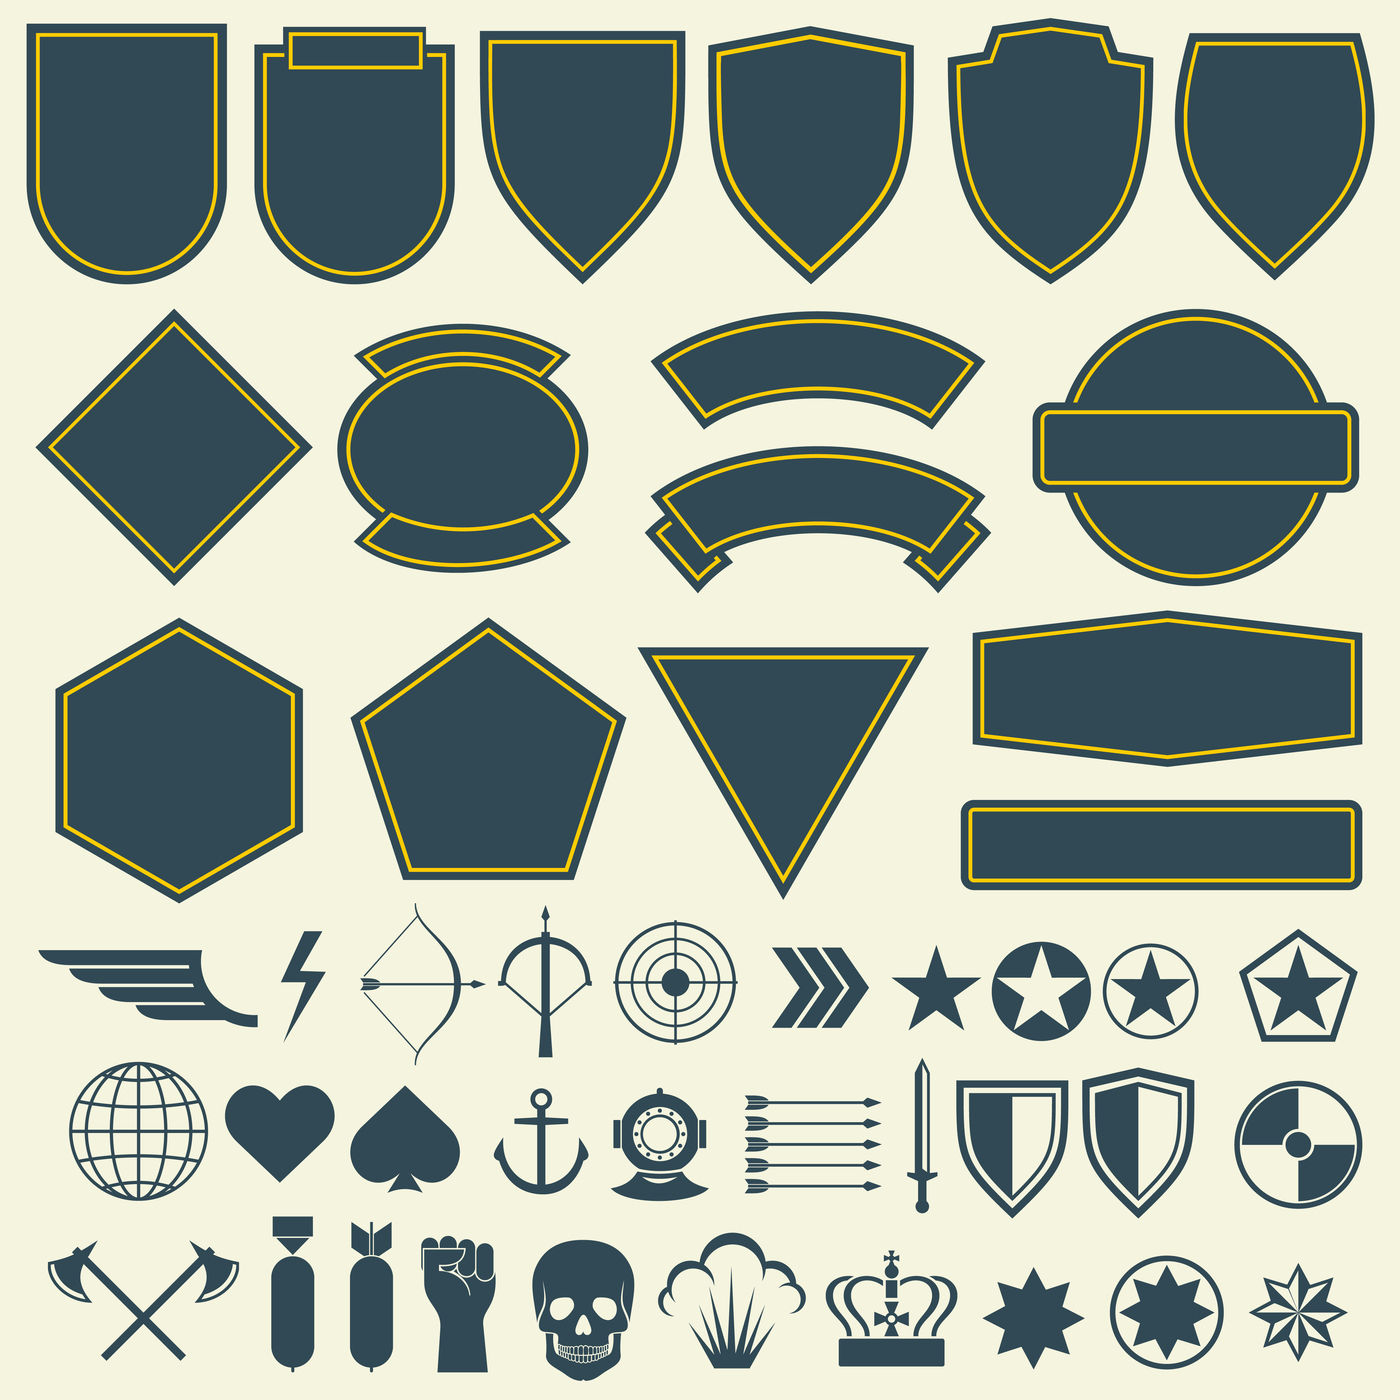 Vector elements for military, army patches, badges set By Microvector